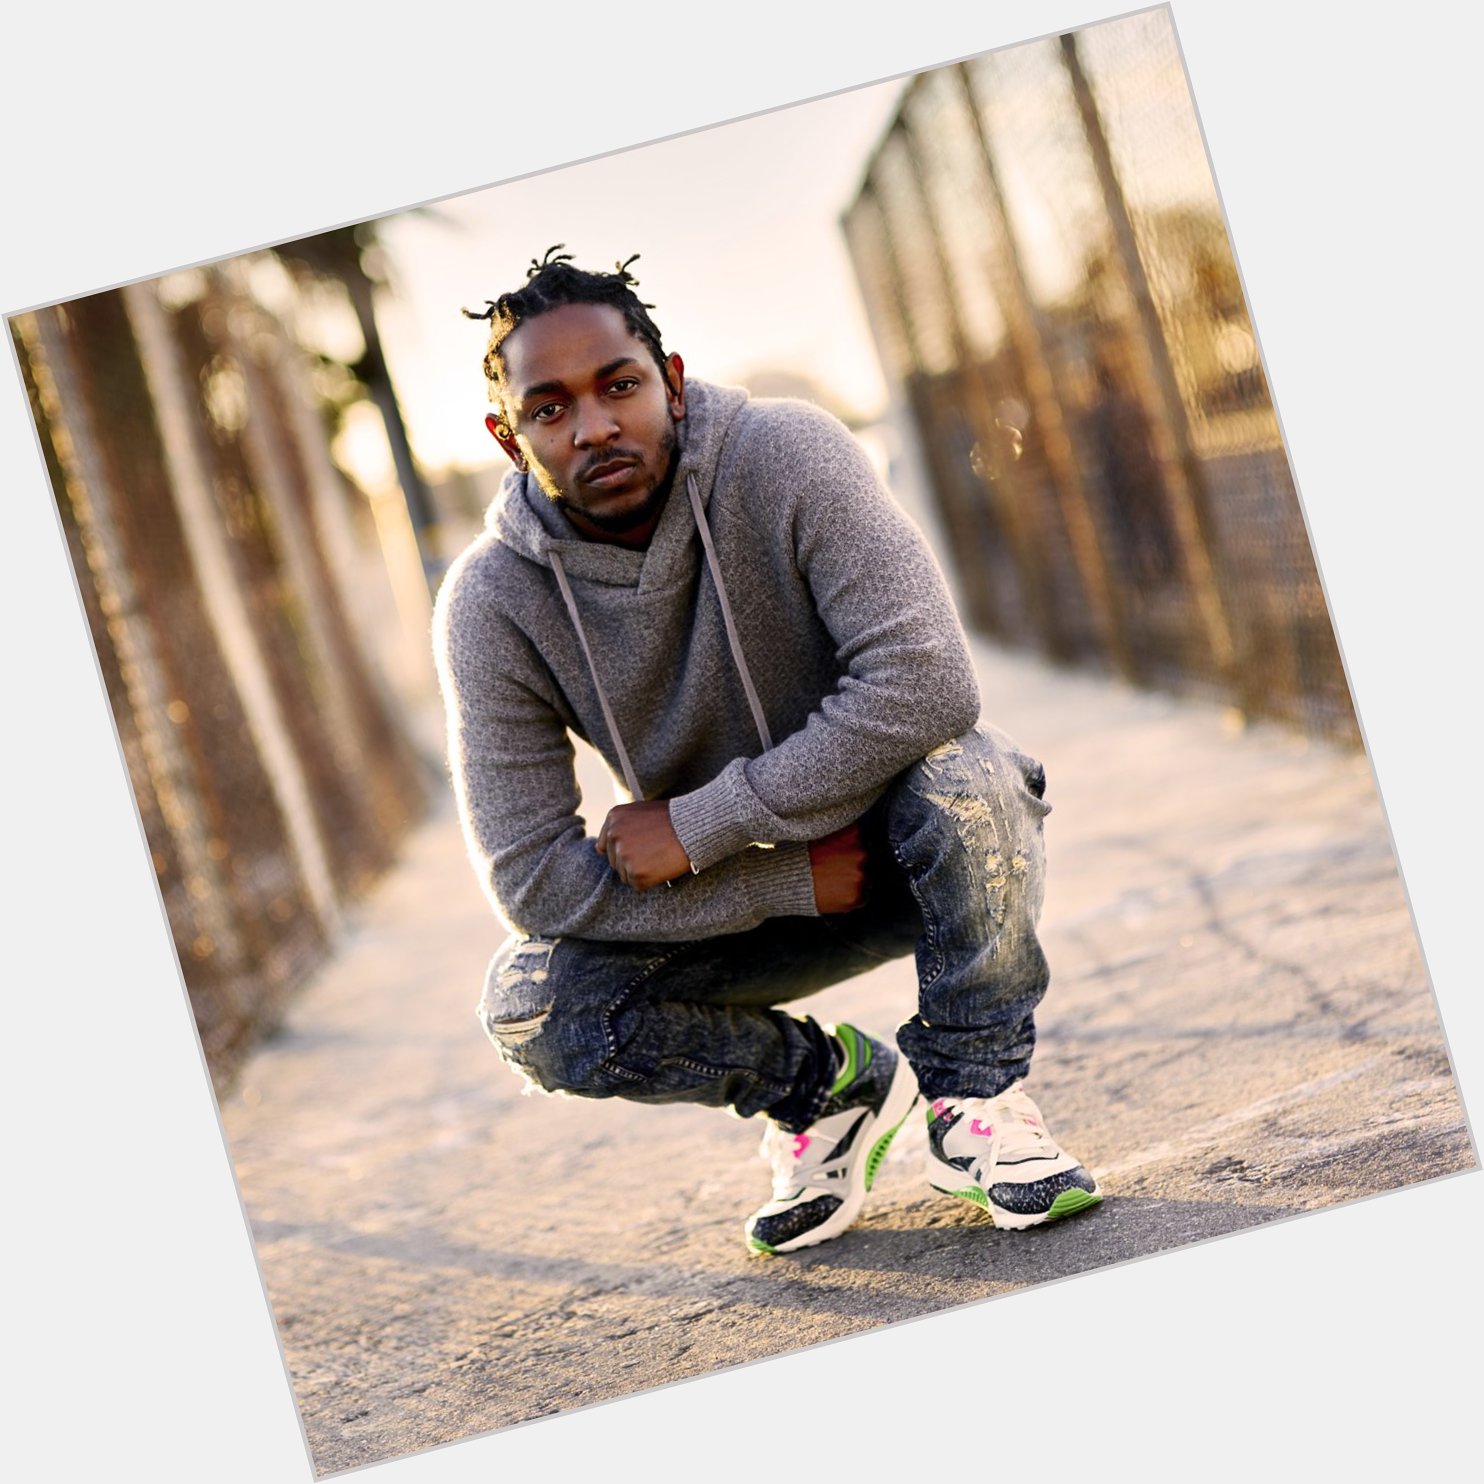 Happy 33rd birthday Kendrick Lamar.

What are you favorite Kendrick tracks or lines? 